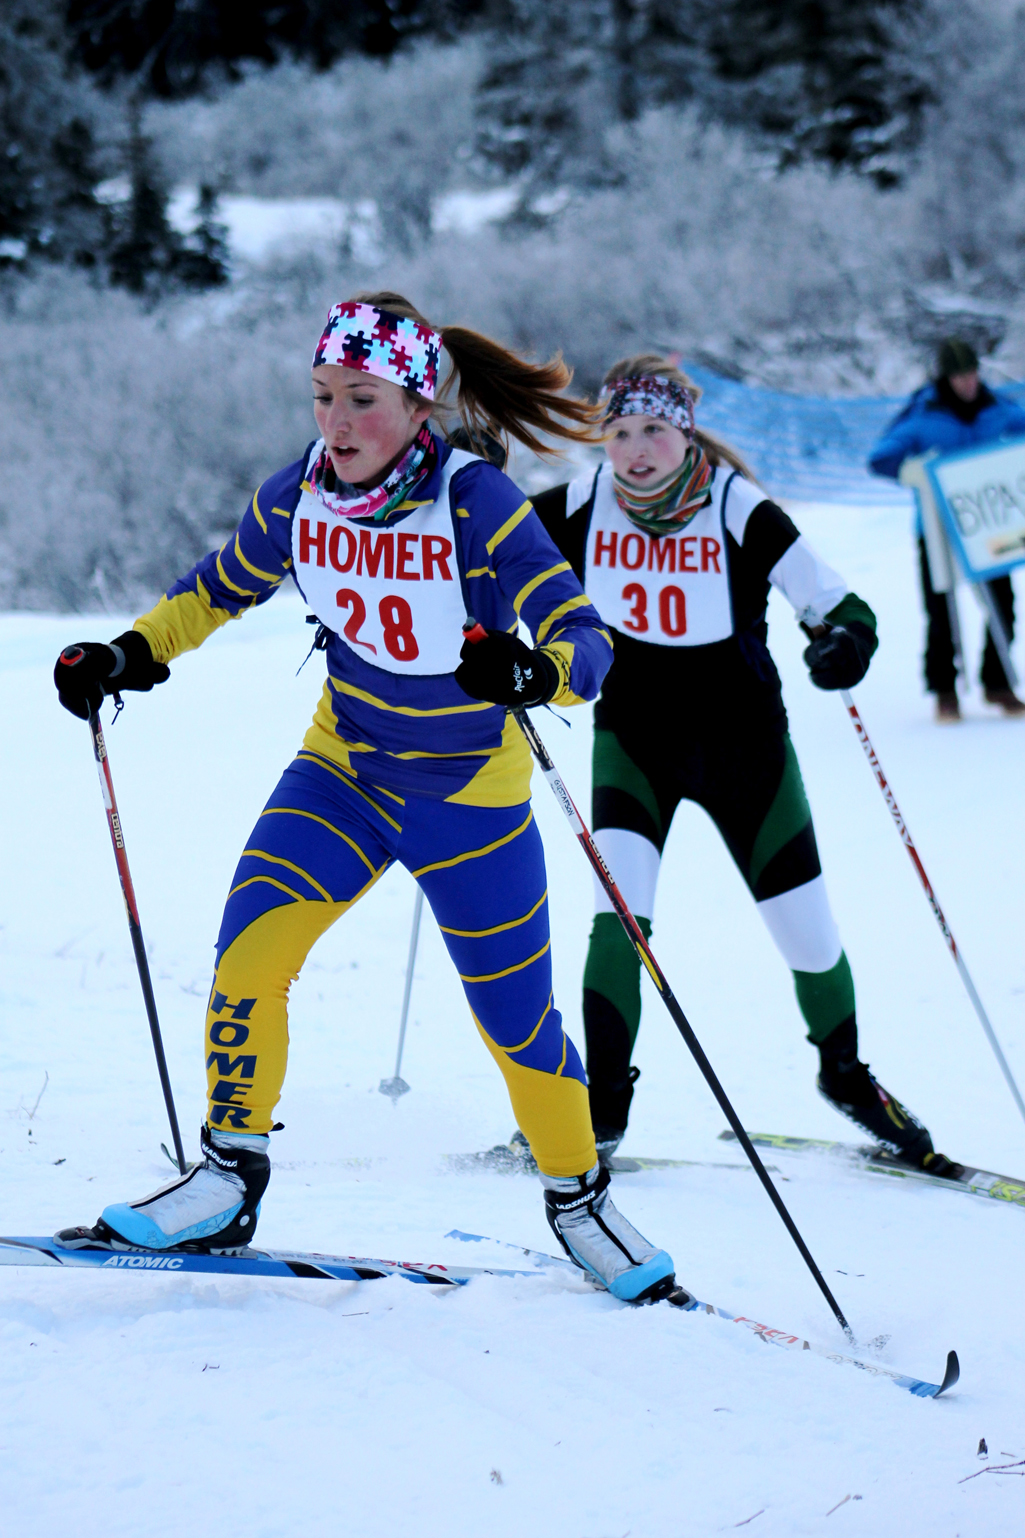 Rachel Ellert skis for the Mariners during Saturday’s 6K Classic race of the Homer Invitational. The Mariner girls placed third in the ski meet.-Photo by Angelina Skowronski